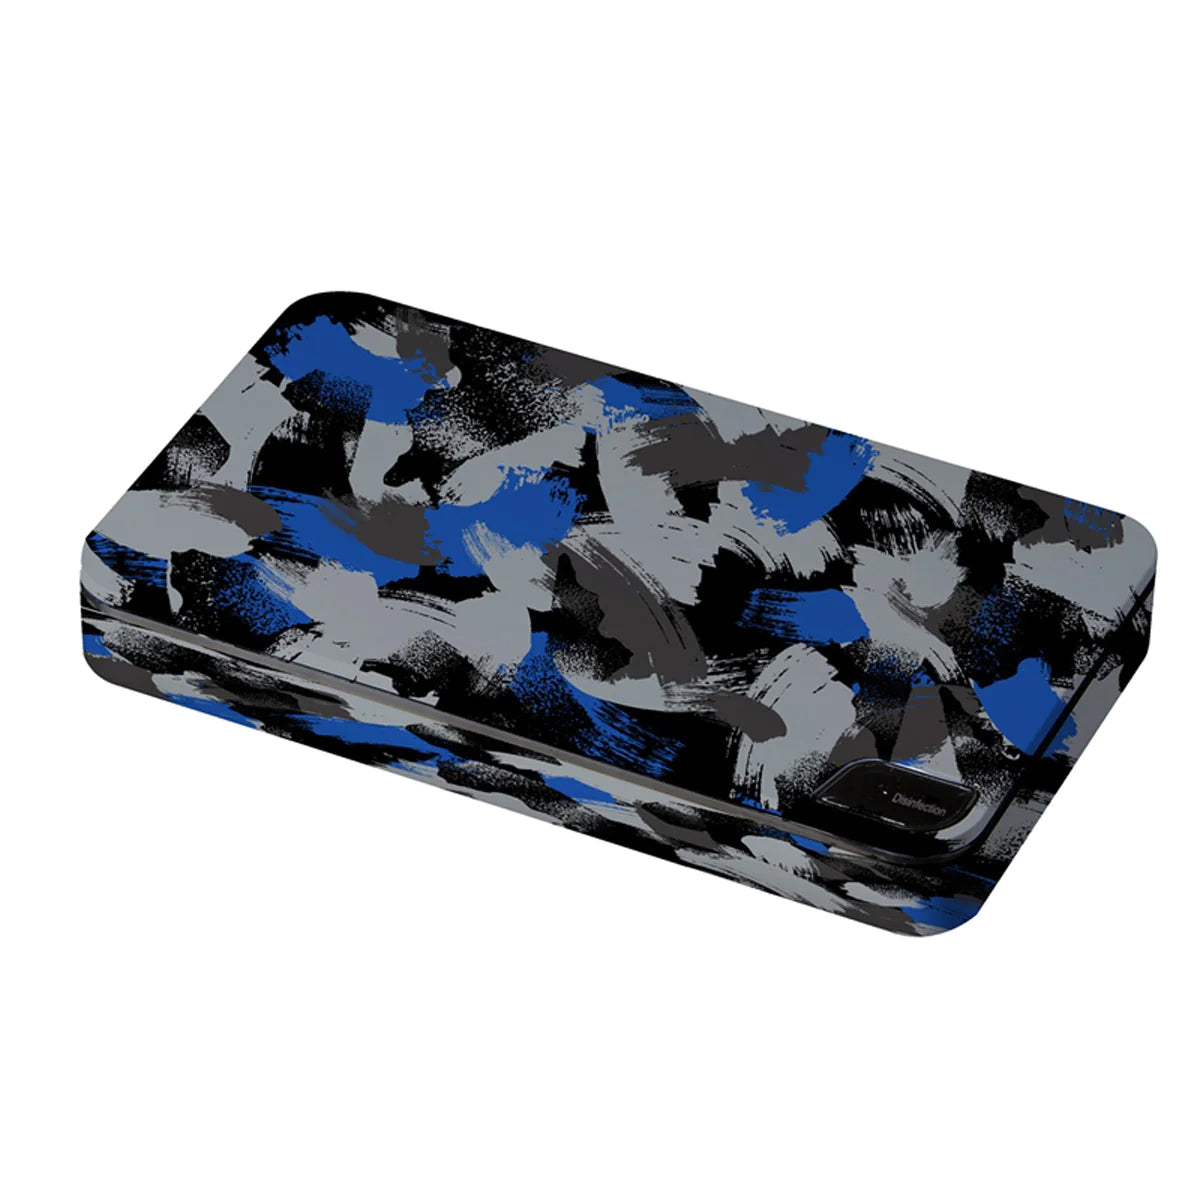 UVC Light Sanitizer and Phone Charging Case, Blue Floral